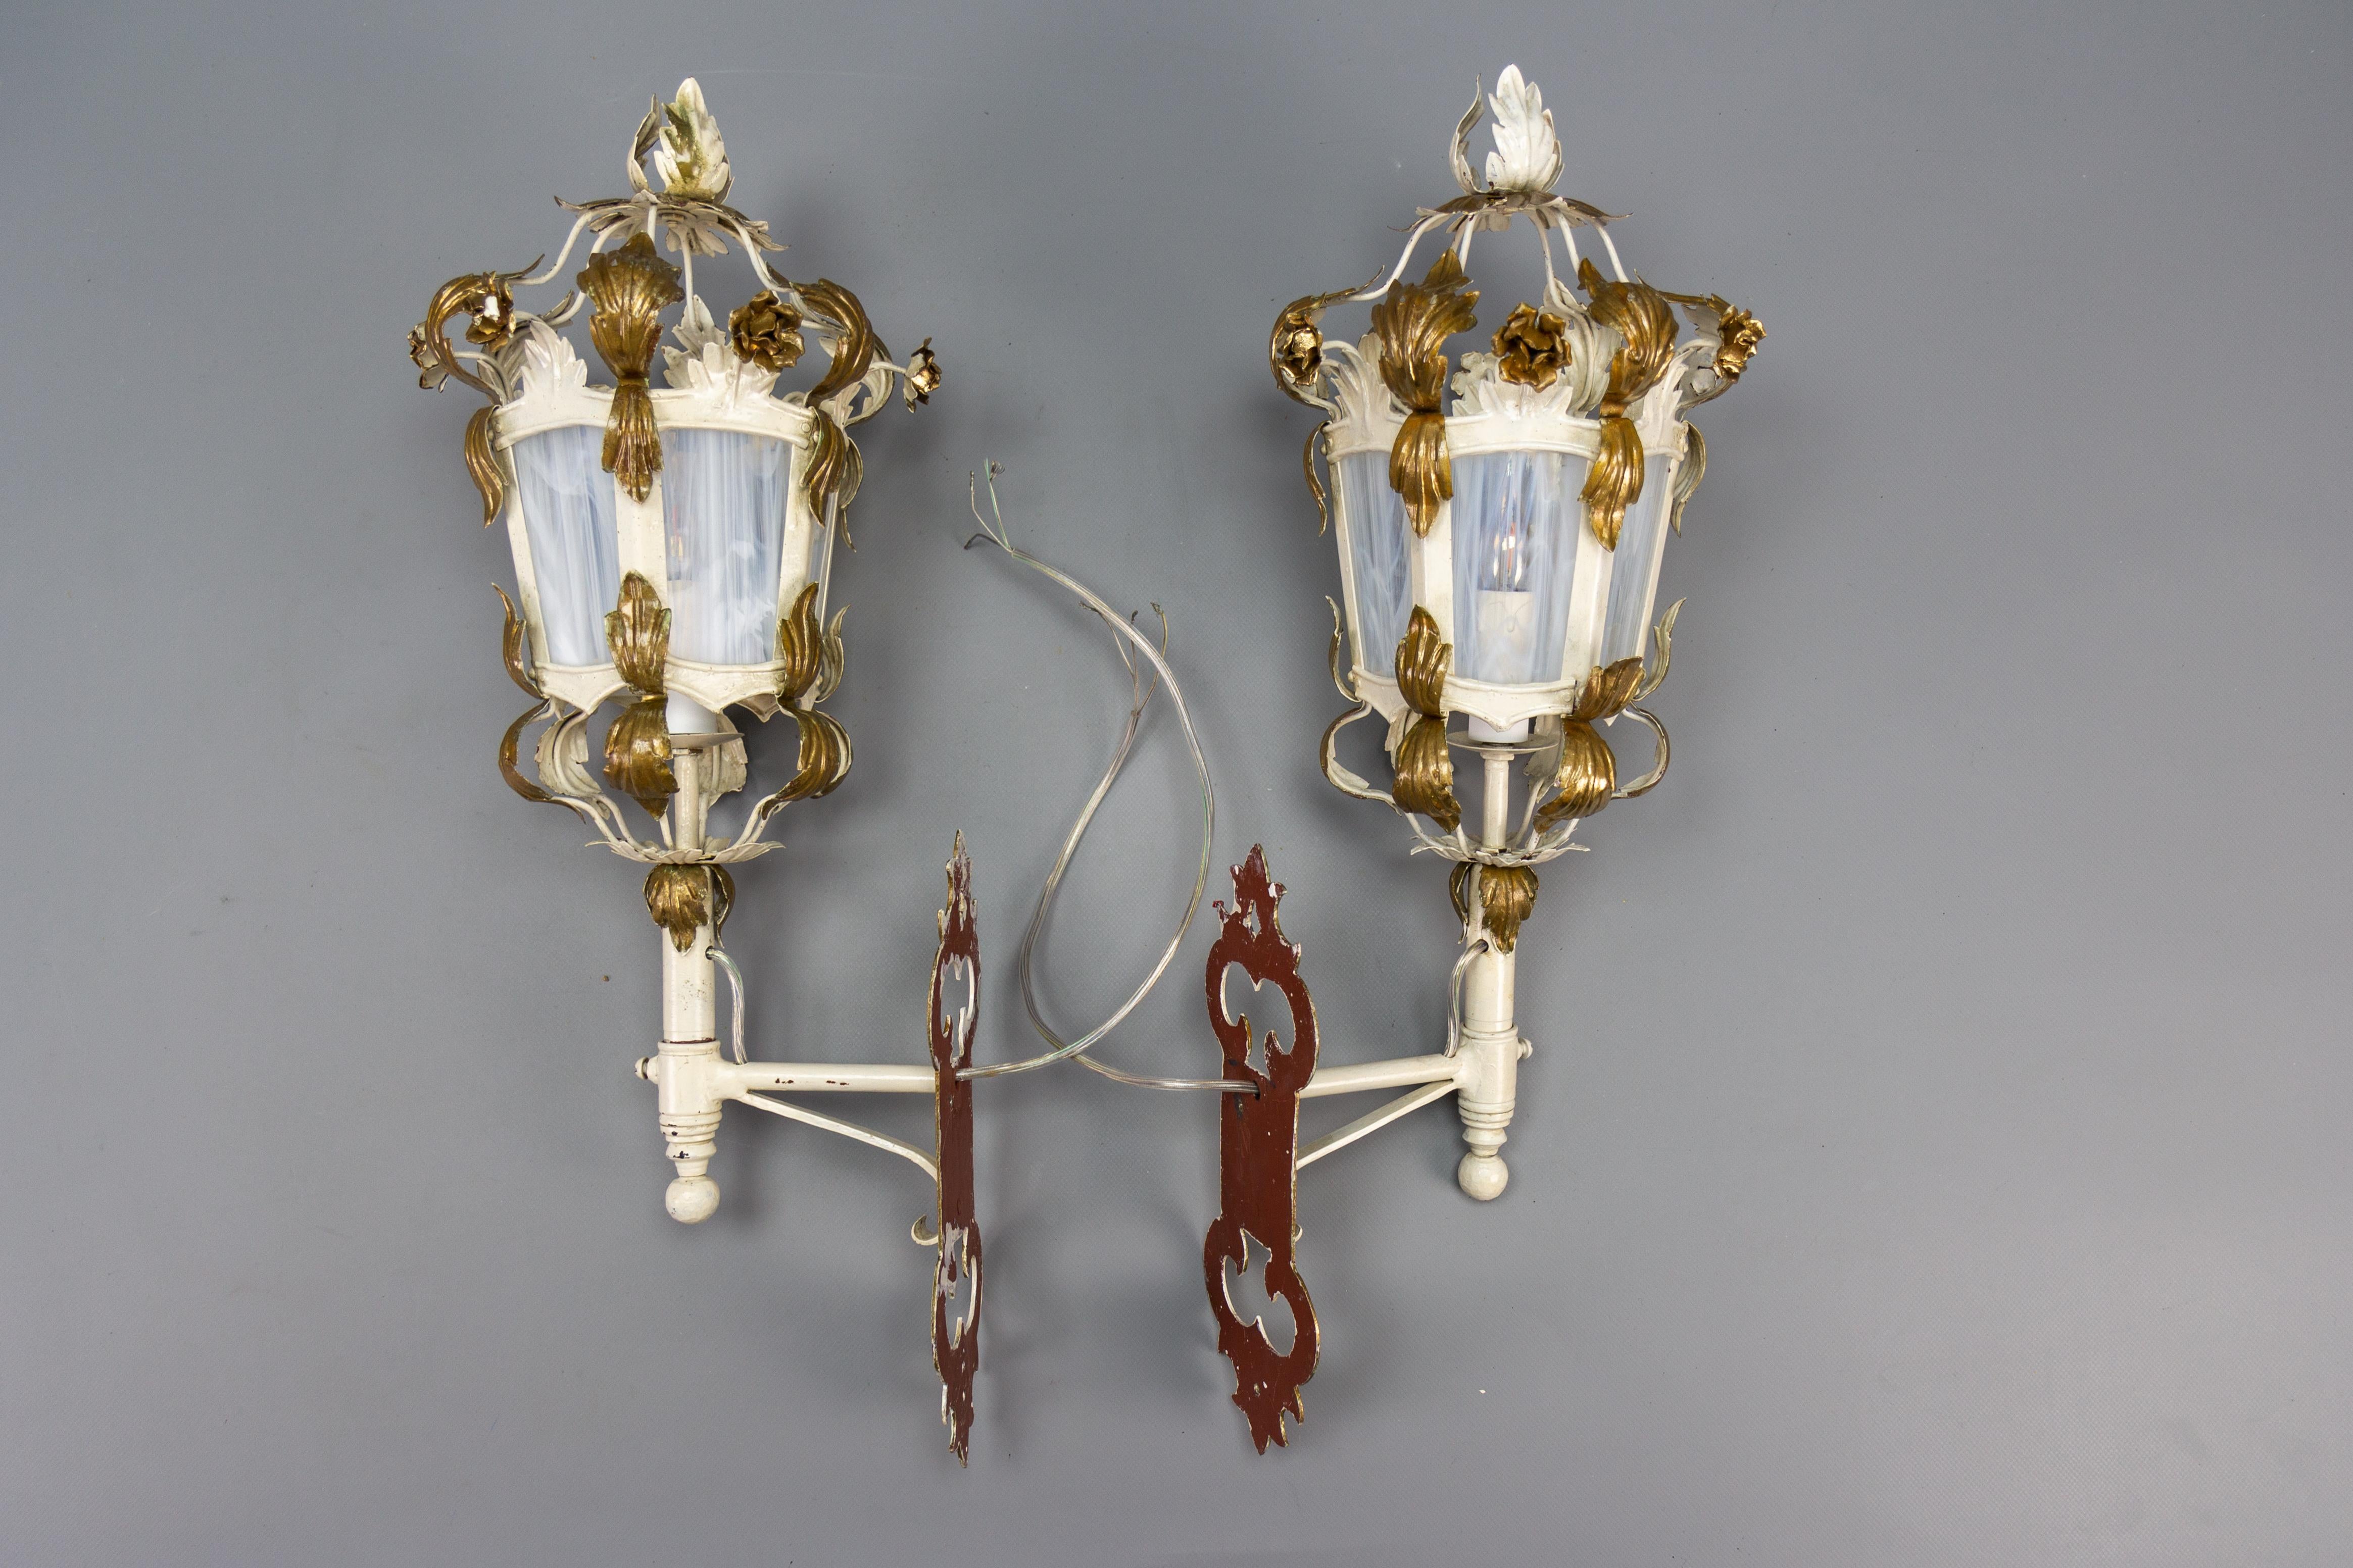 Pair of Italian White and Golden Color Metal and Glass Wall Lanterns, ca. 1970s For Sale 7